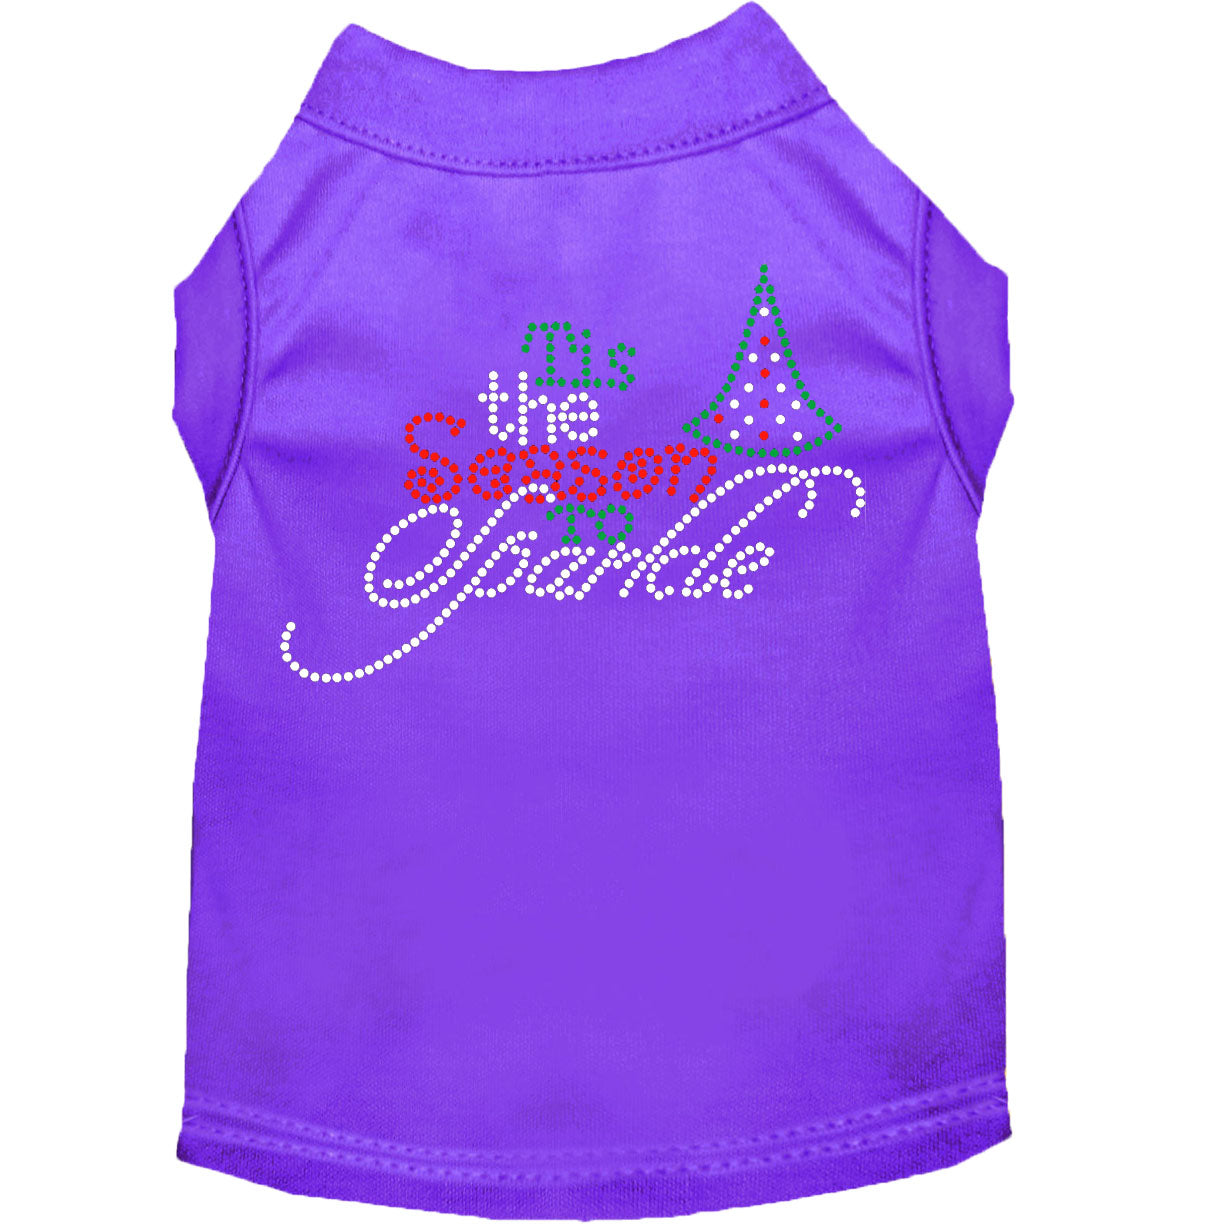 Tis the Season to Sparkle Rhinestone Shirts for Cats and Dogs